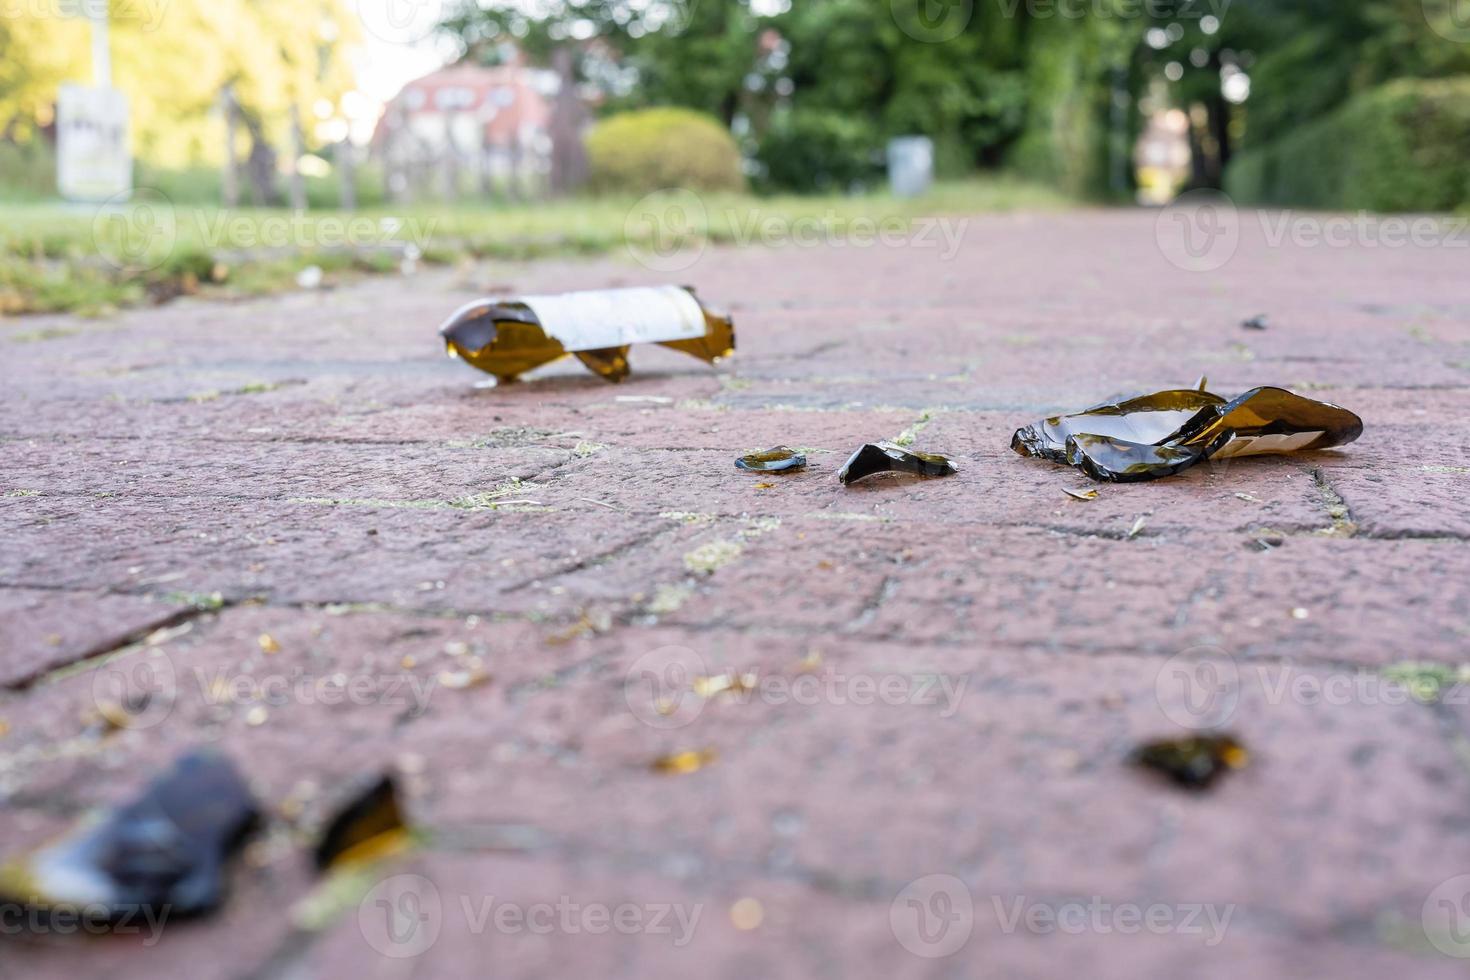 Broken glass bottles on the road after a student booze photo